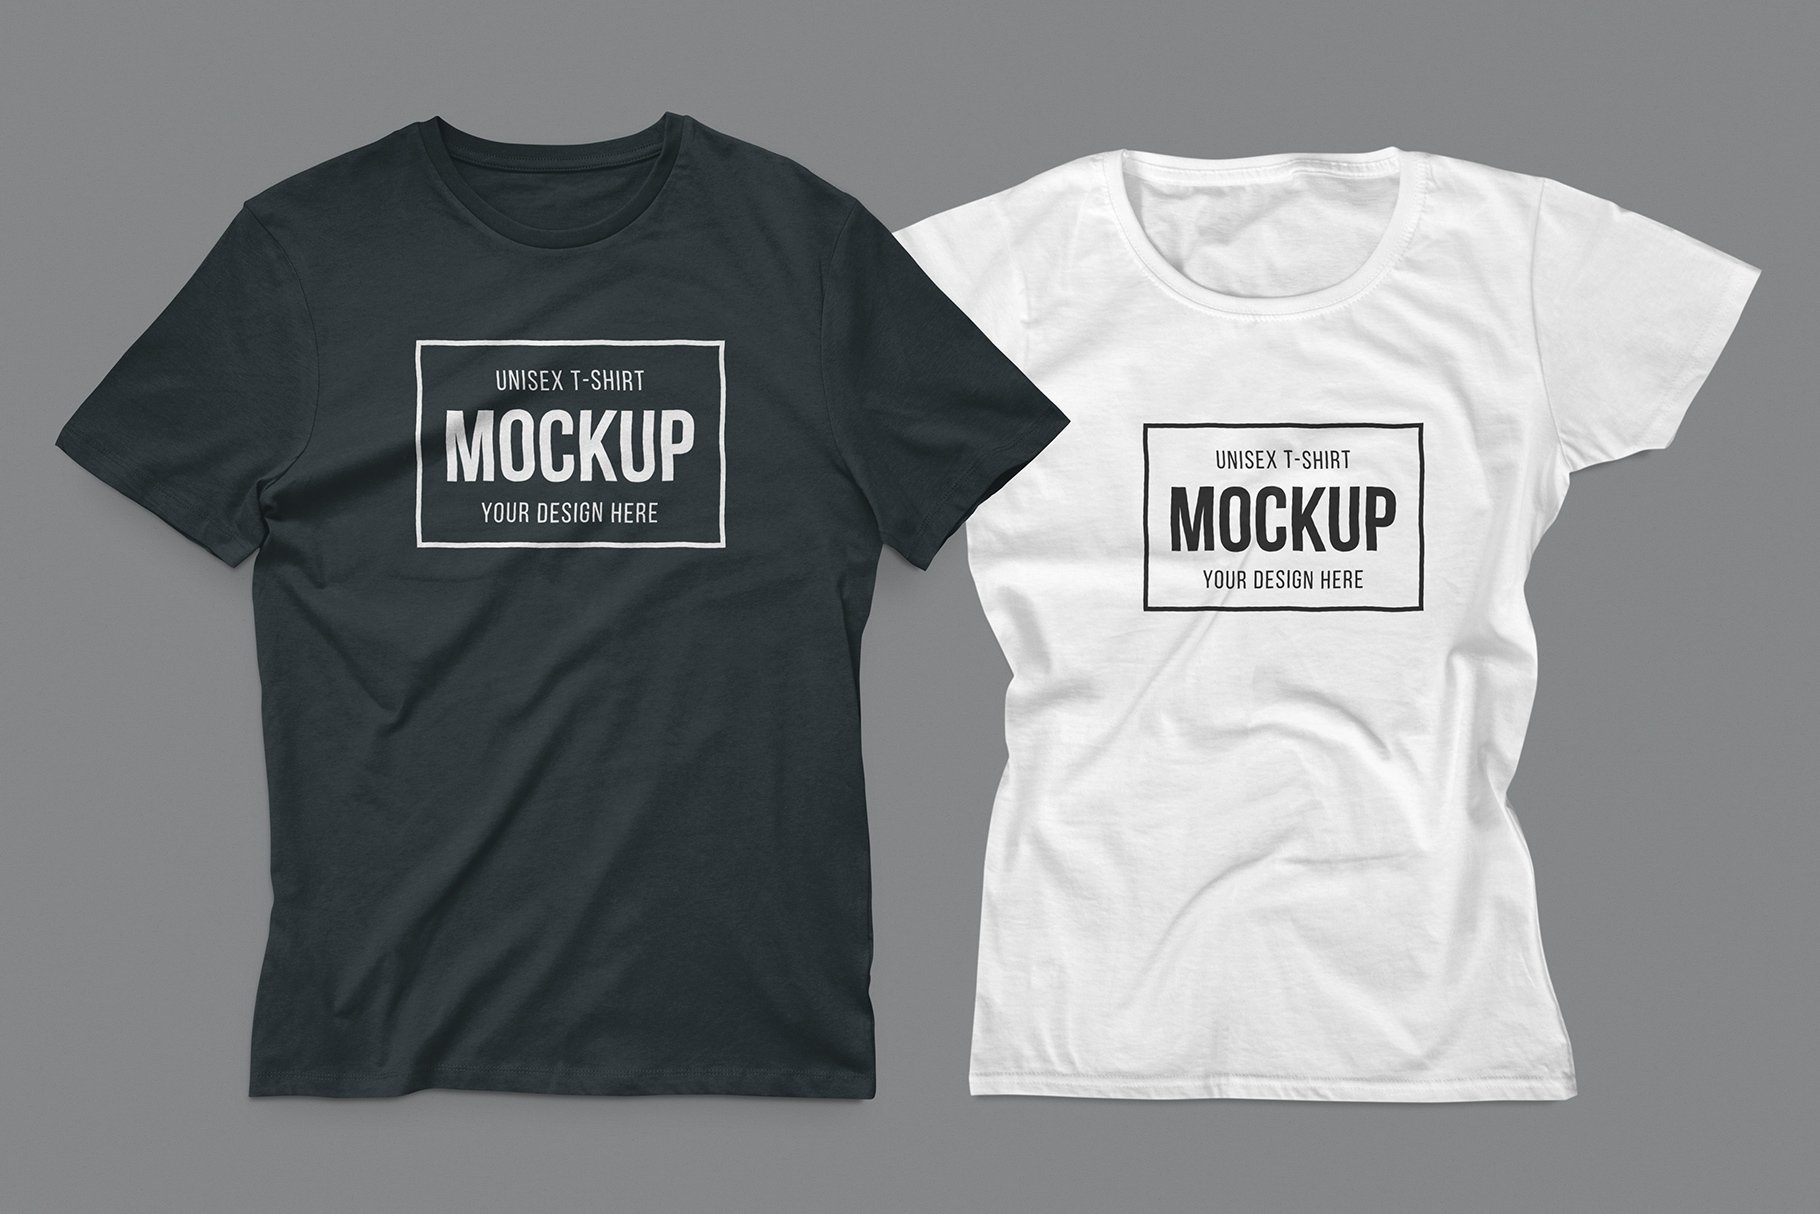 Looking for free T shirt templates for your project?